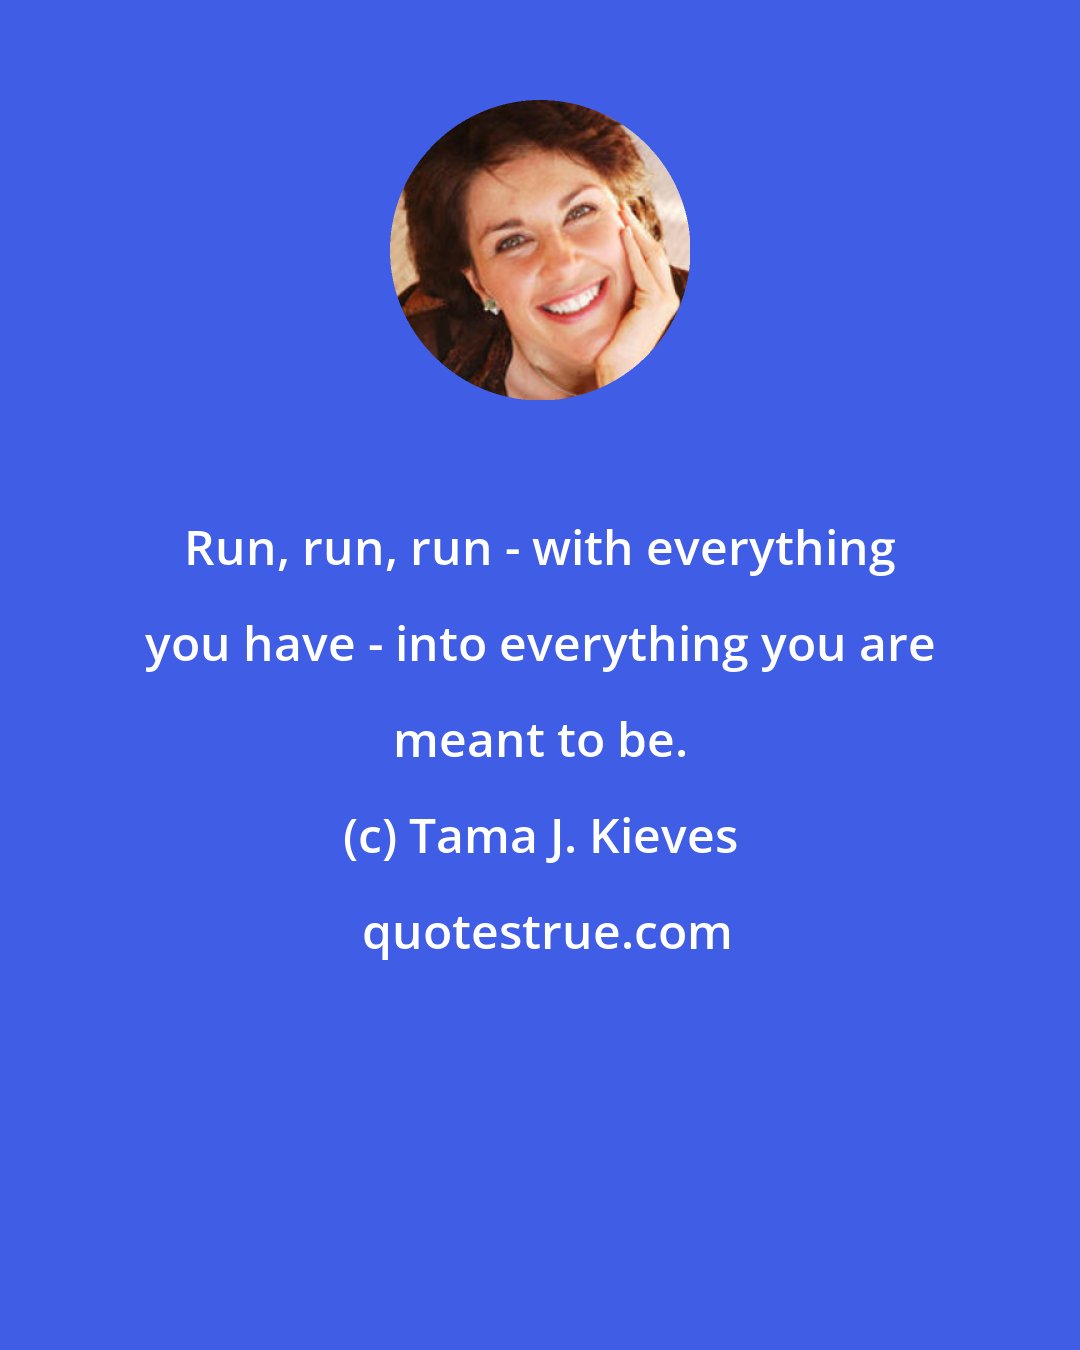 Tama J. Kieves: Run, run, run - with everything you have - into everything you are meant to be.